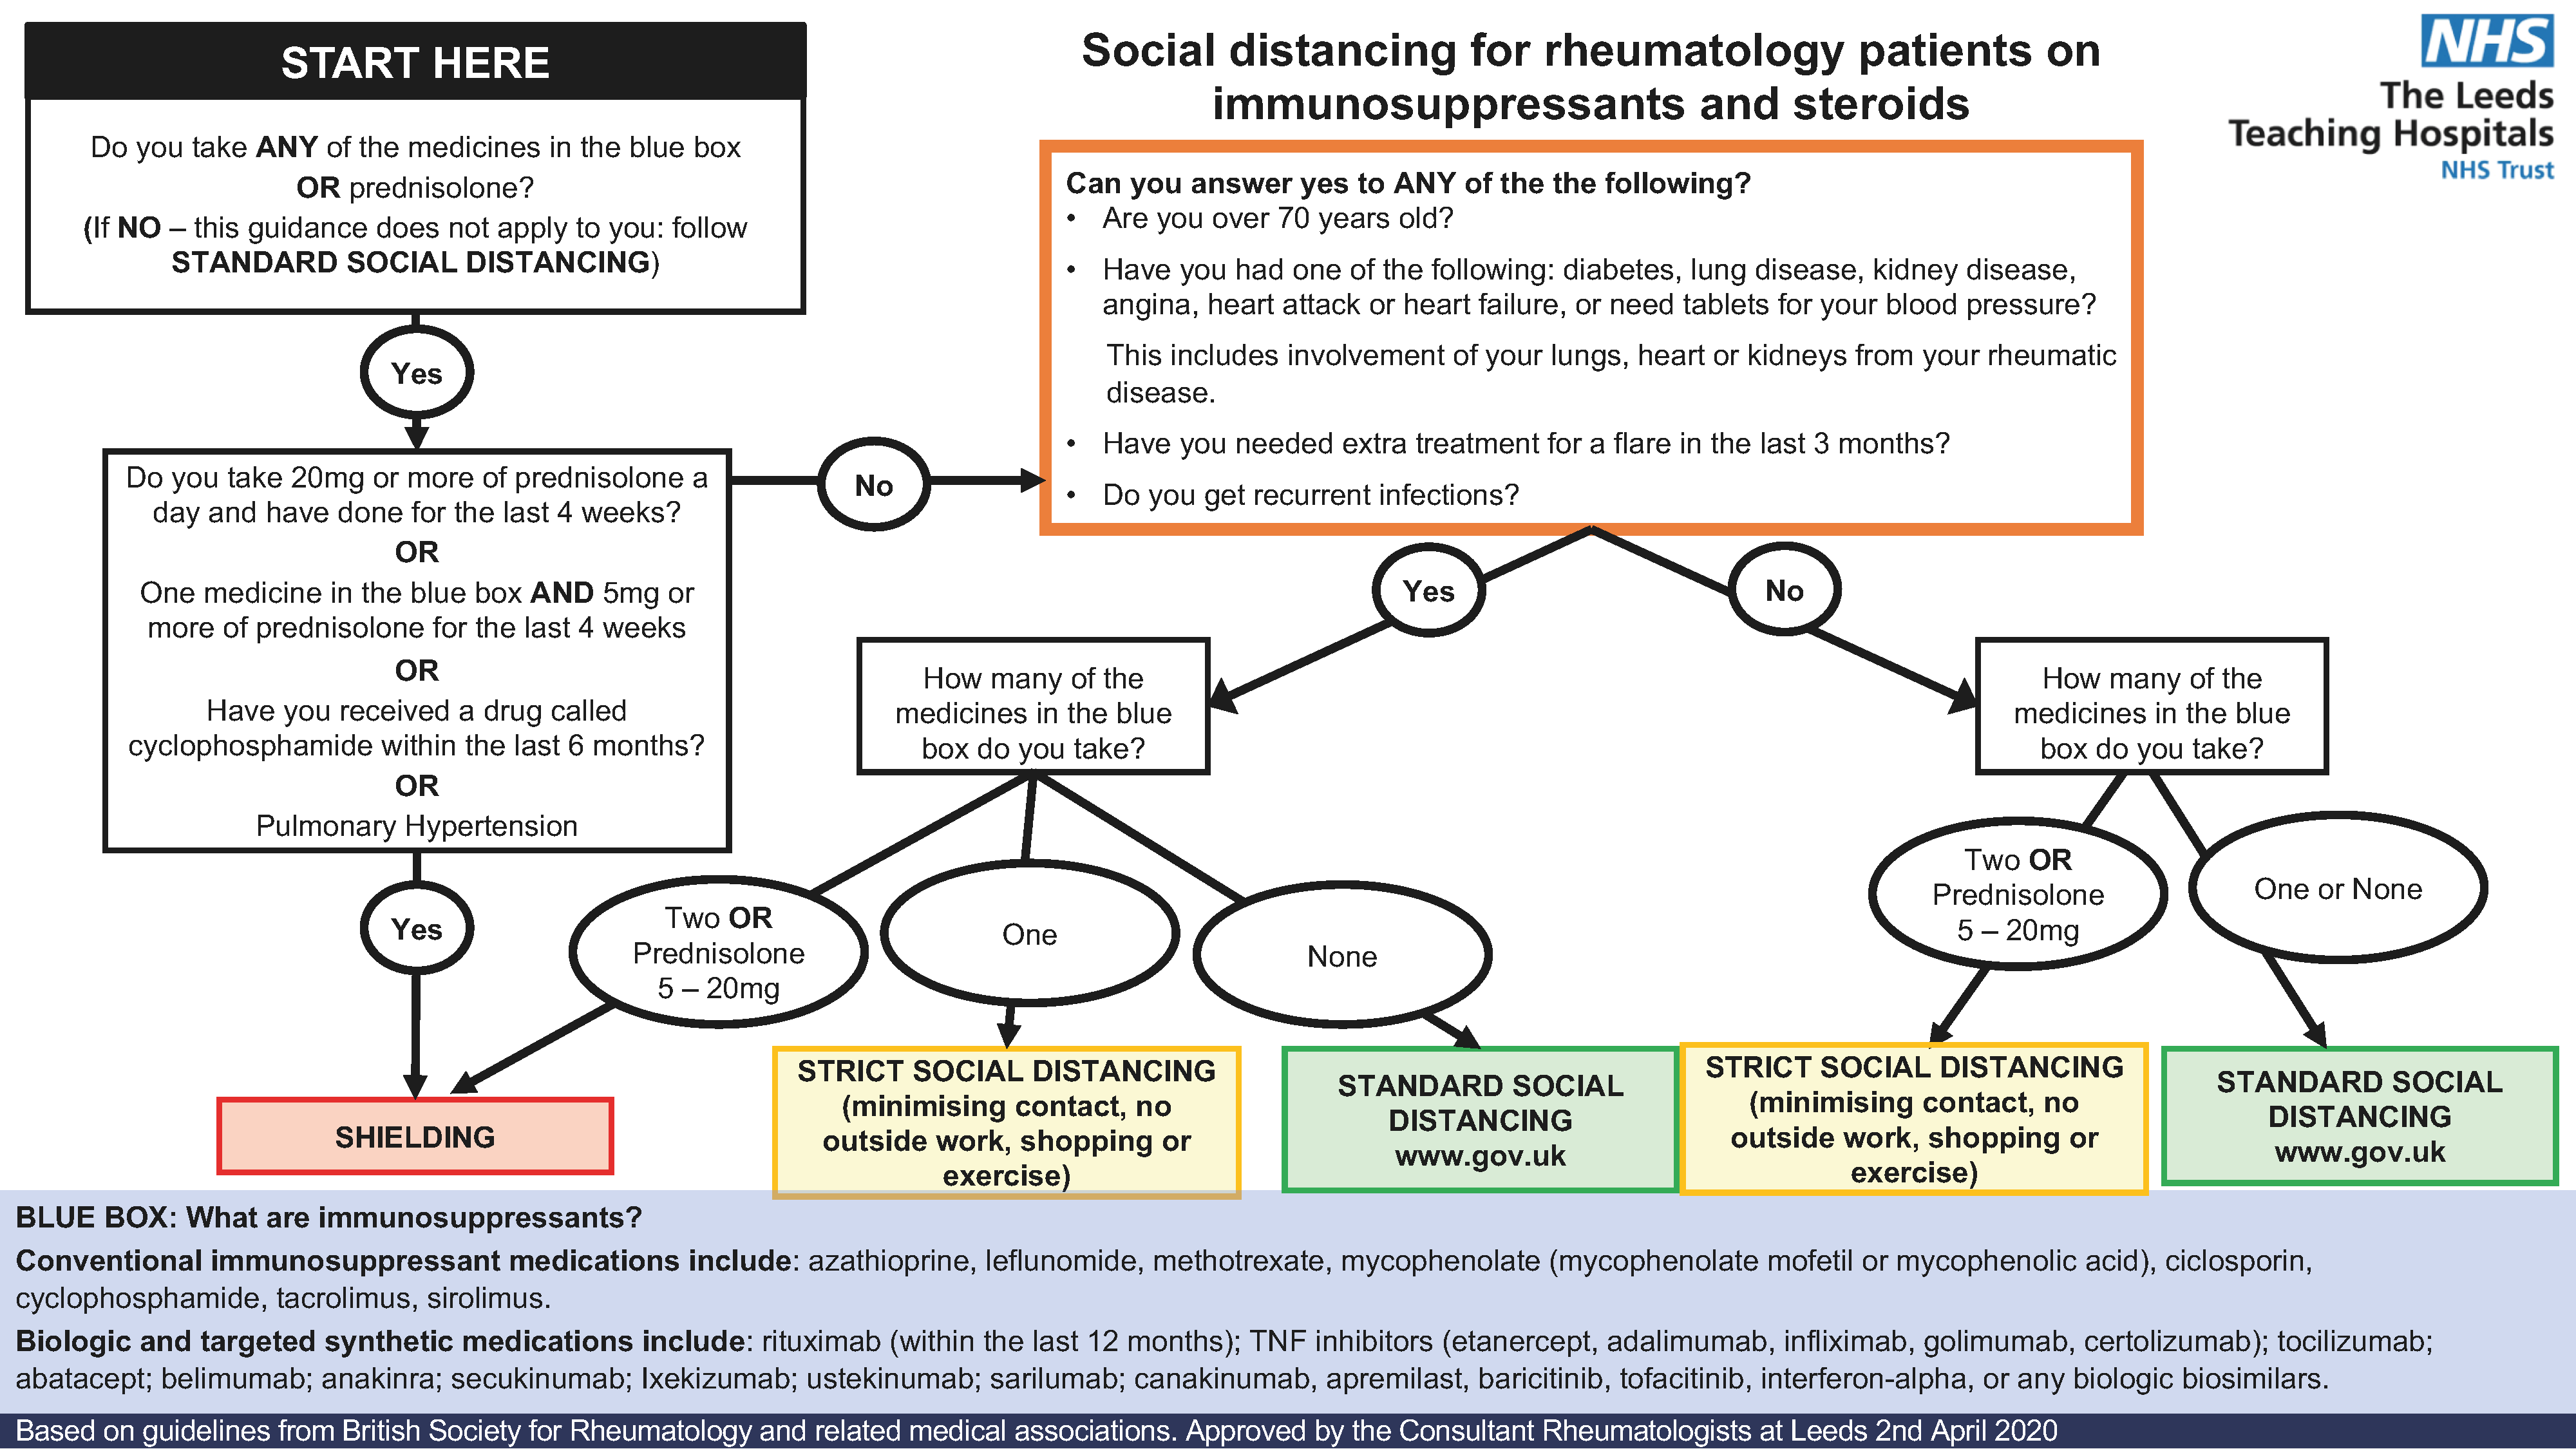 Covid 19 Shielding Strict Or Normal Social Distancing Vasculitis Uk